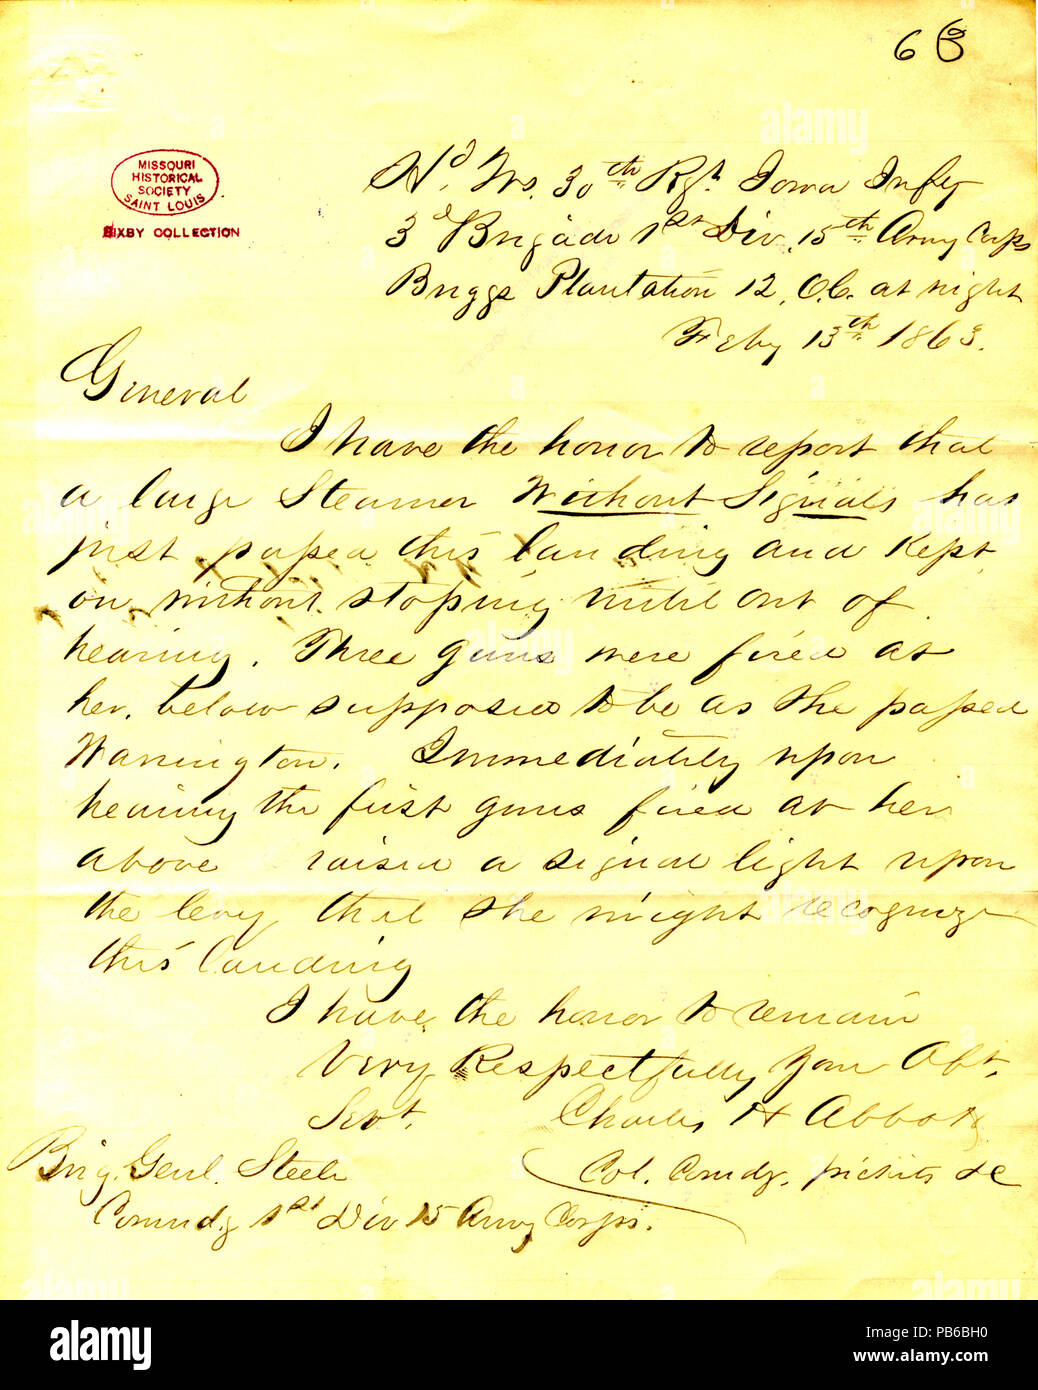 900 Letter from Charles H. Abbott, headquarters, 30th Iowa Infantry, 3rd Brigade, 1st Division, 15th Army Corps, Briggs Plantation, to Brigadier General Steele, February 13, 1863 Stock Photo